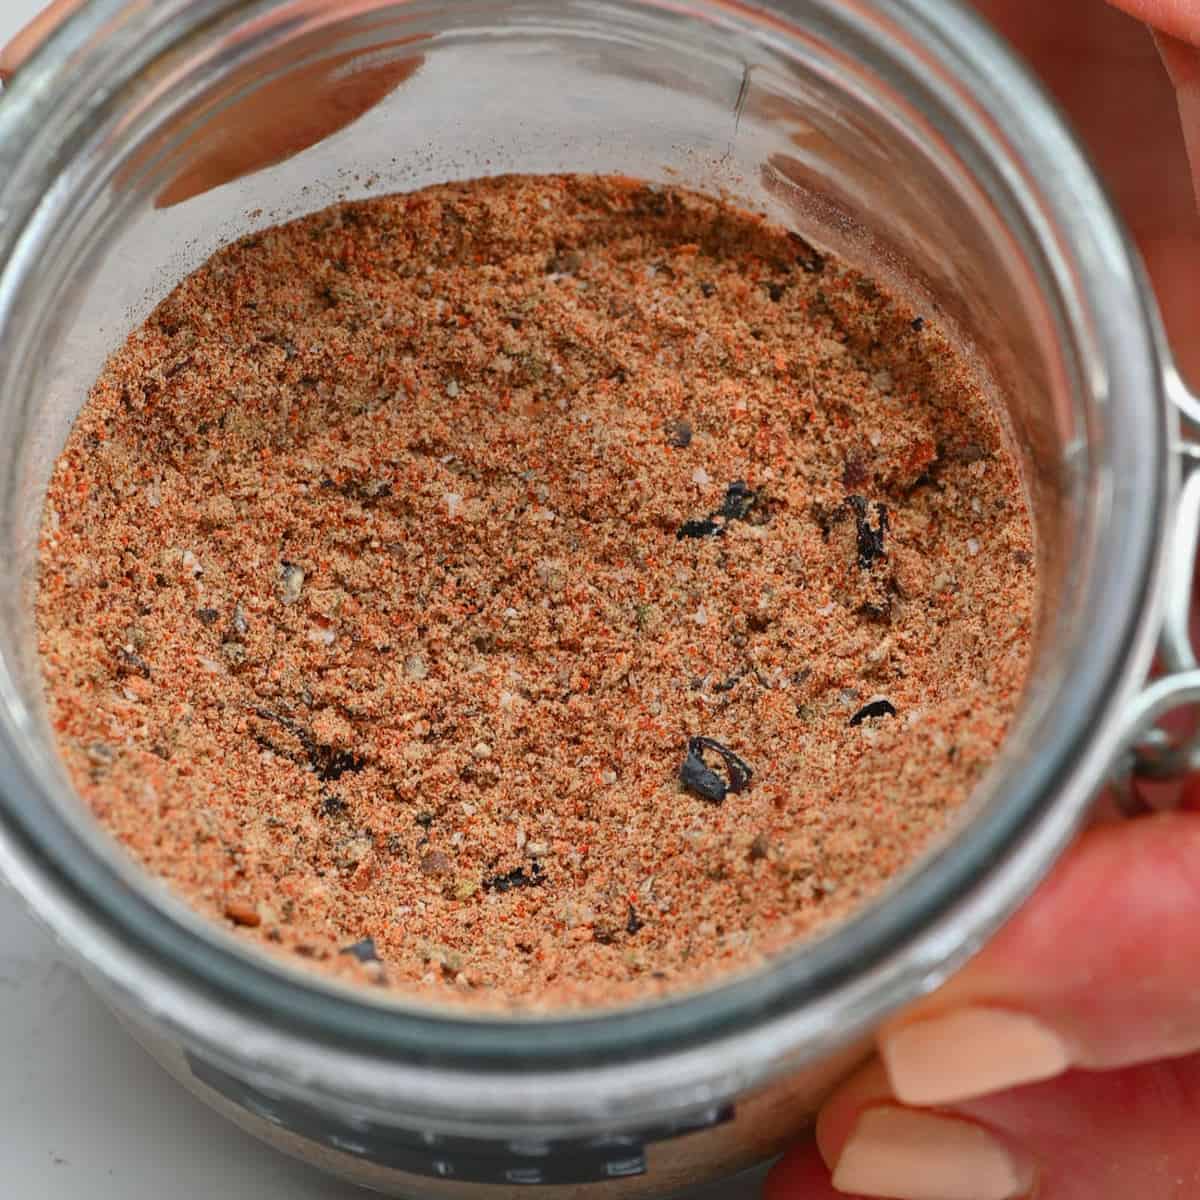 A small jar with Mexican spice blend